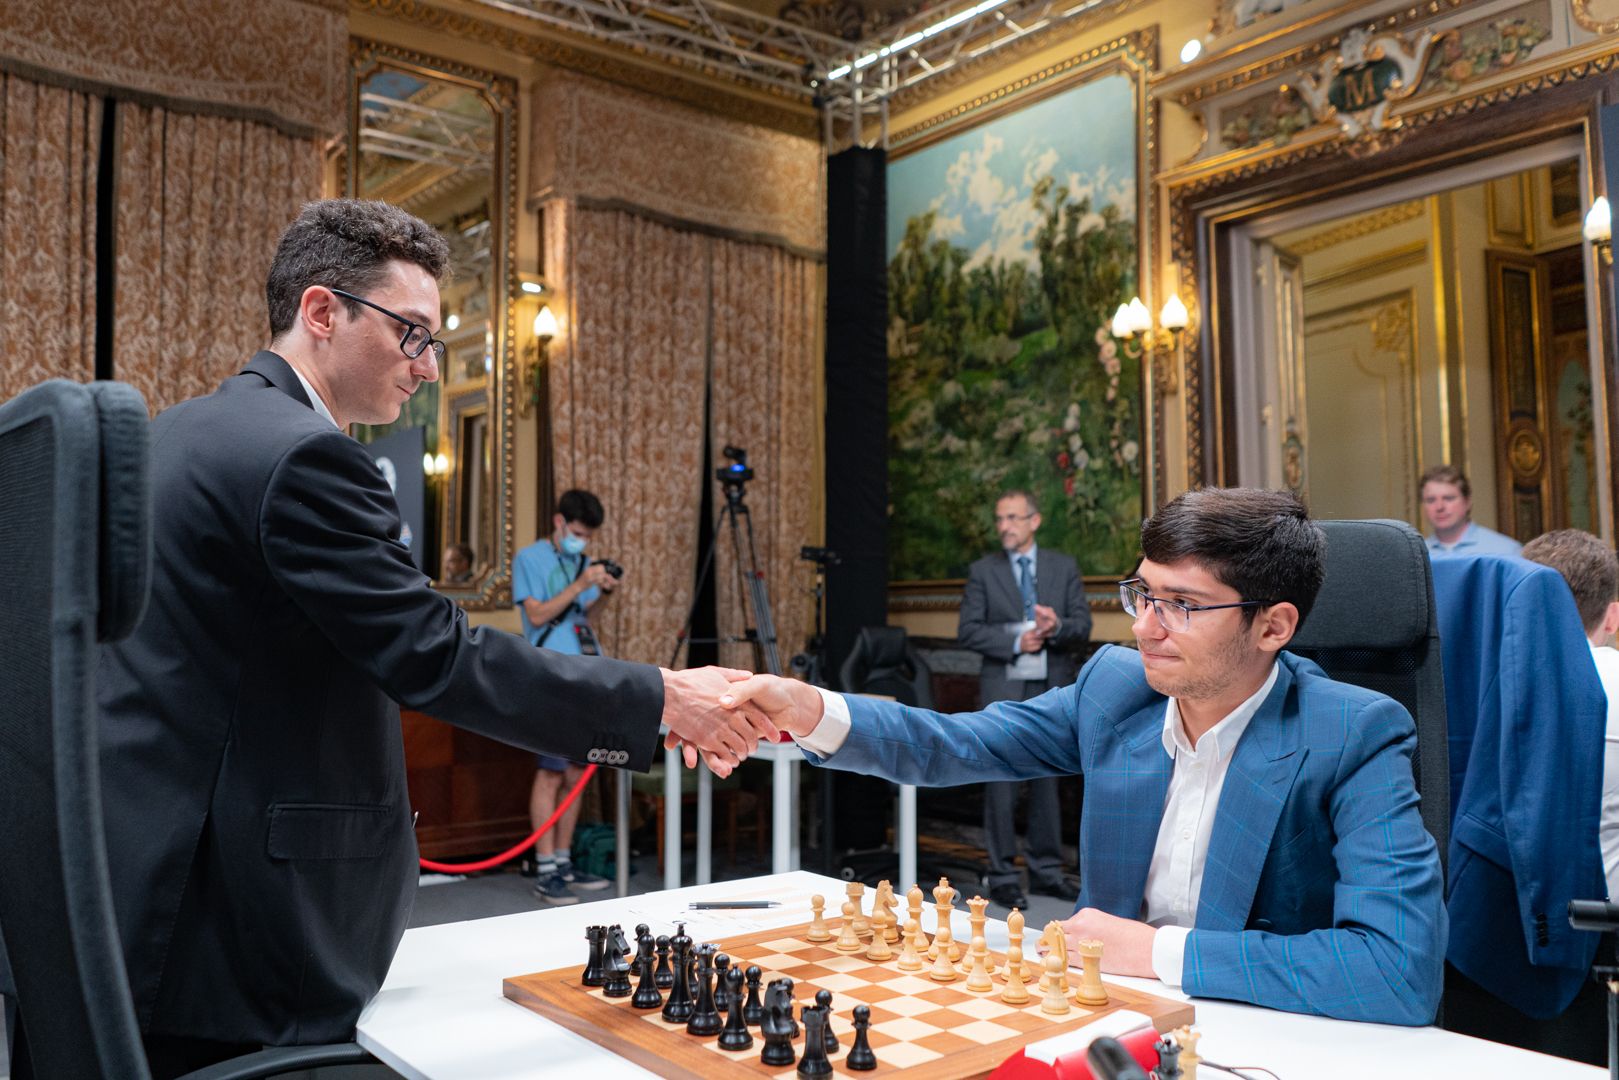 2022 Candidates Tournament (Madrid, Spain) - The Chess Drum